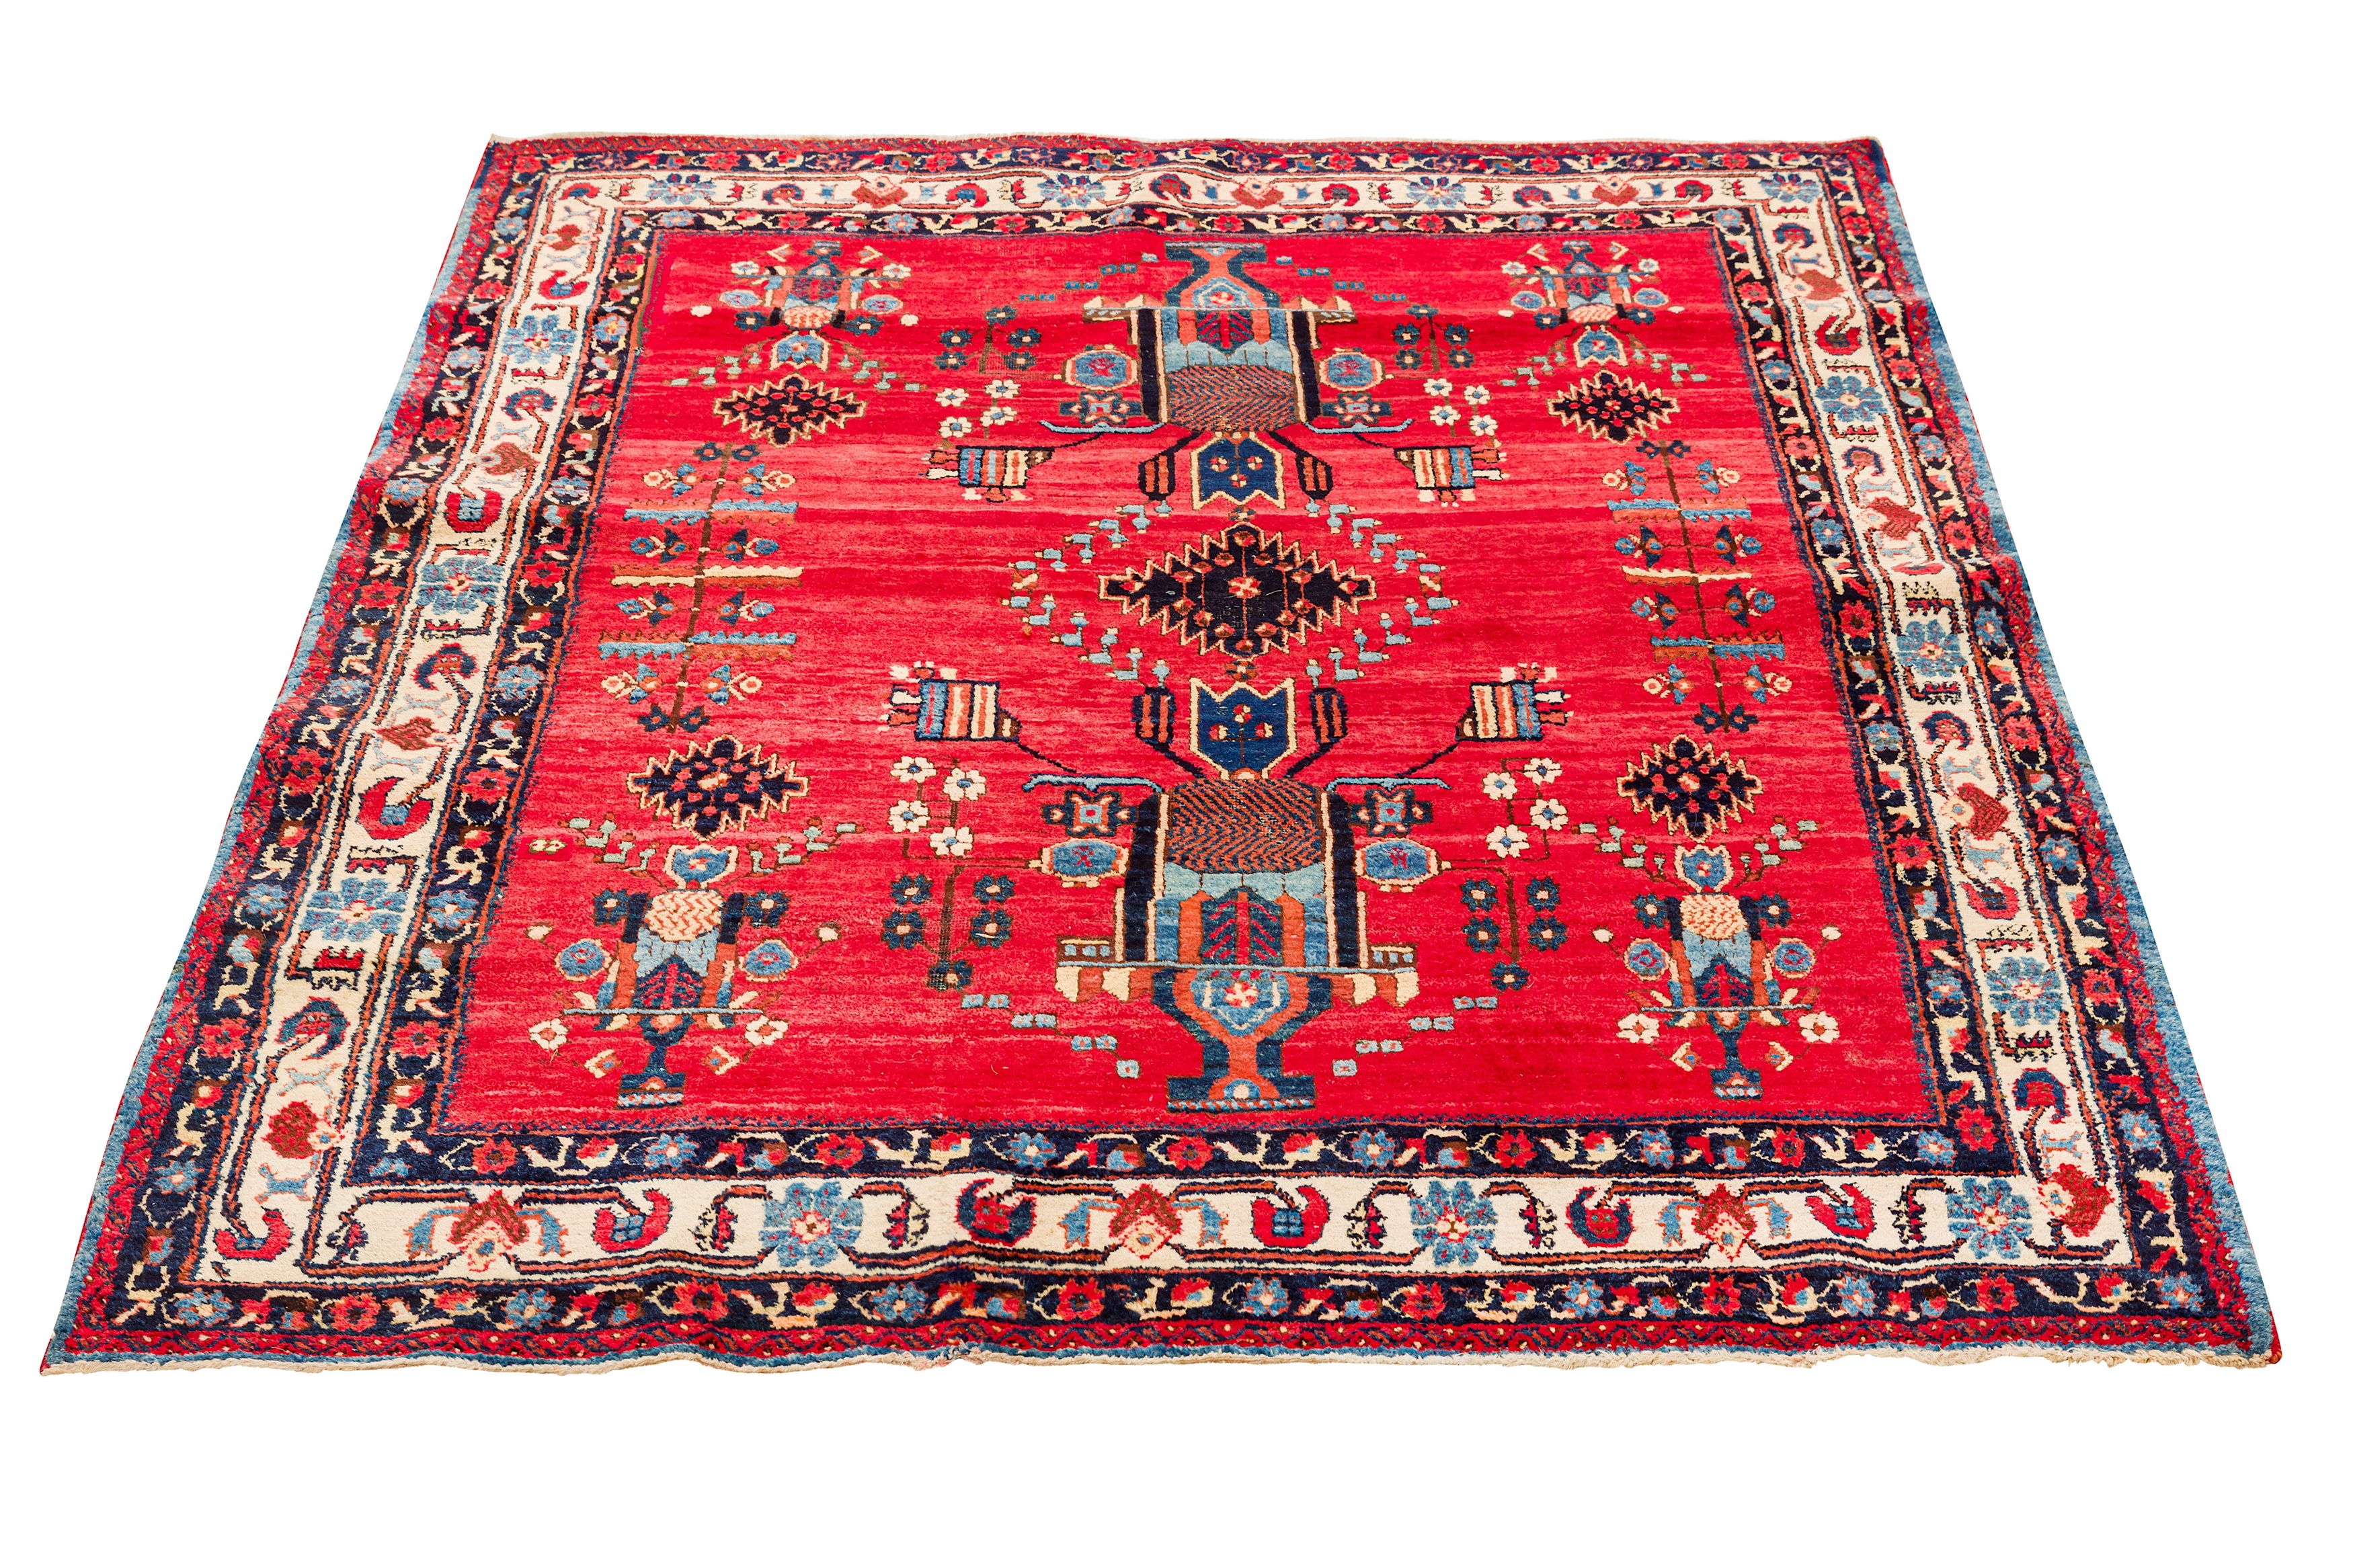 A FINE AFSHAR RUG, SOUTH-WEST PERSIA - Image 2 of 8